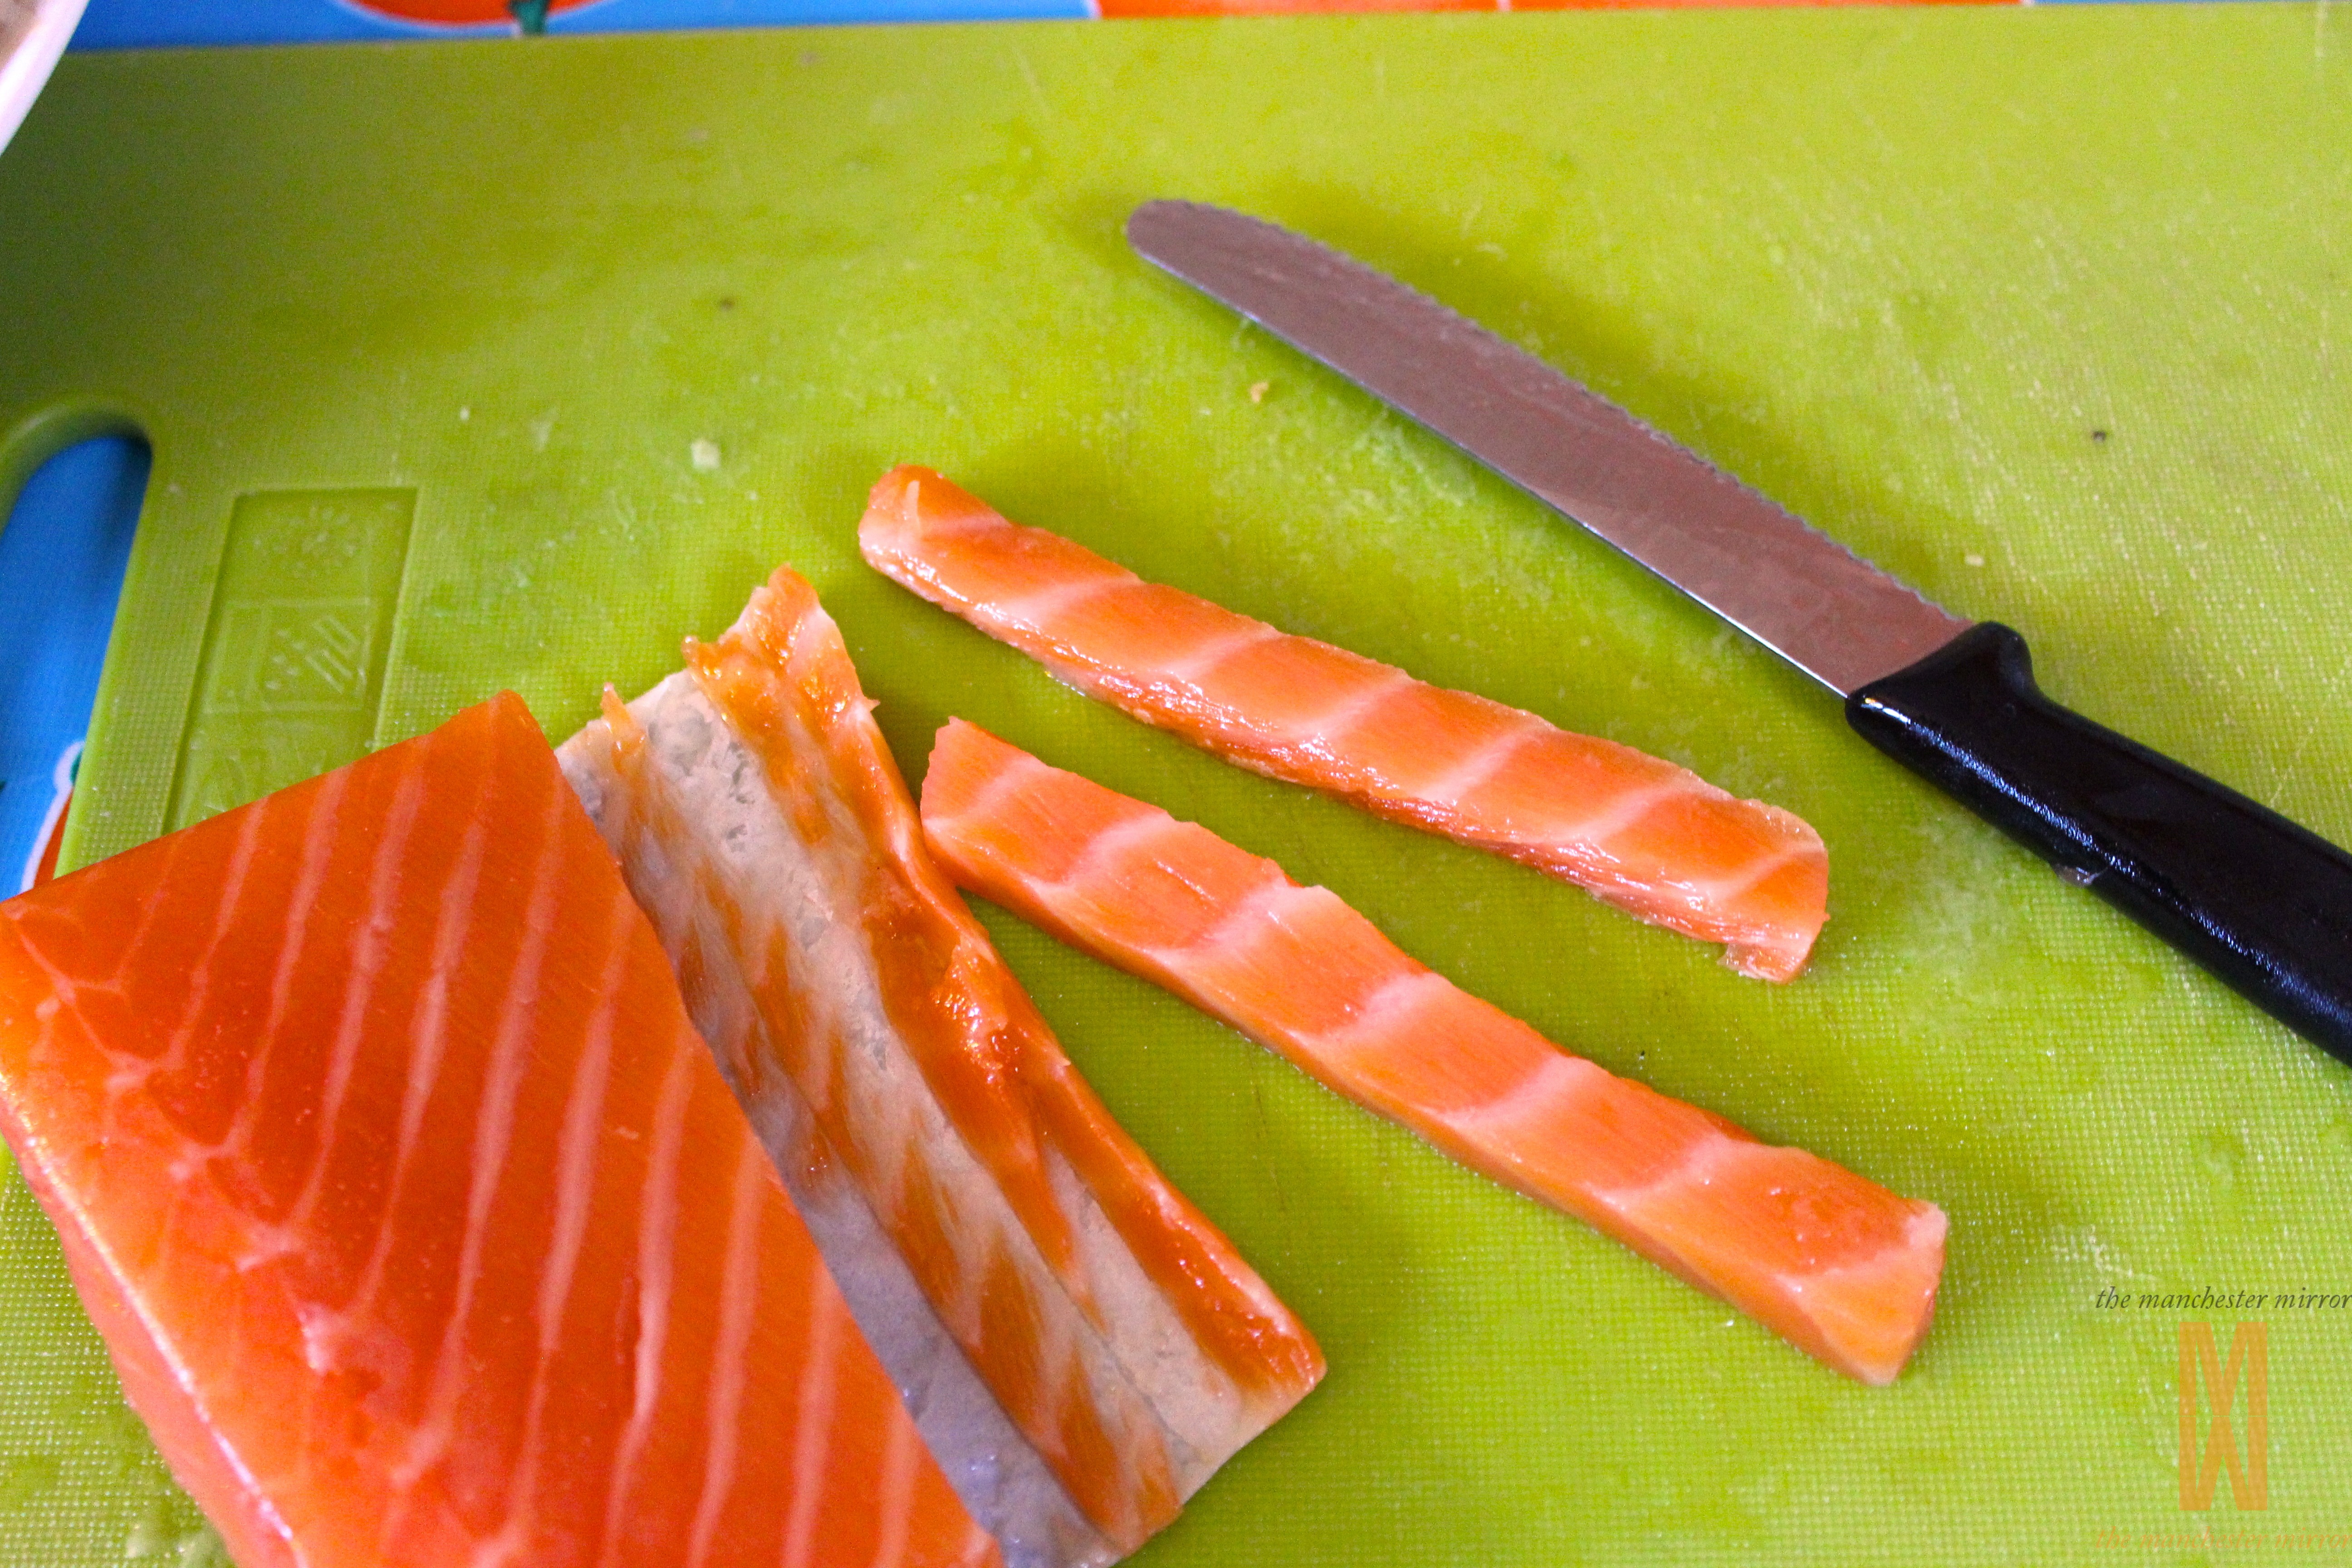 Recipe: Making Sushi at Home | The Manchester Mirror